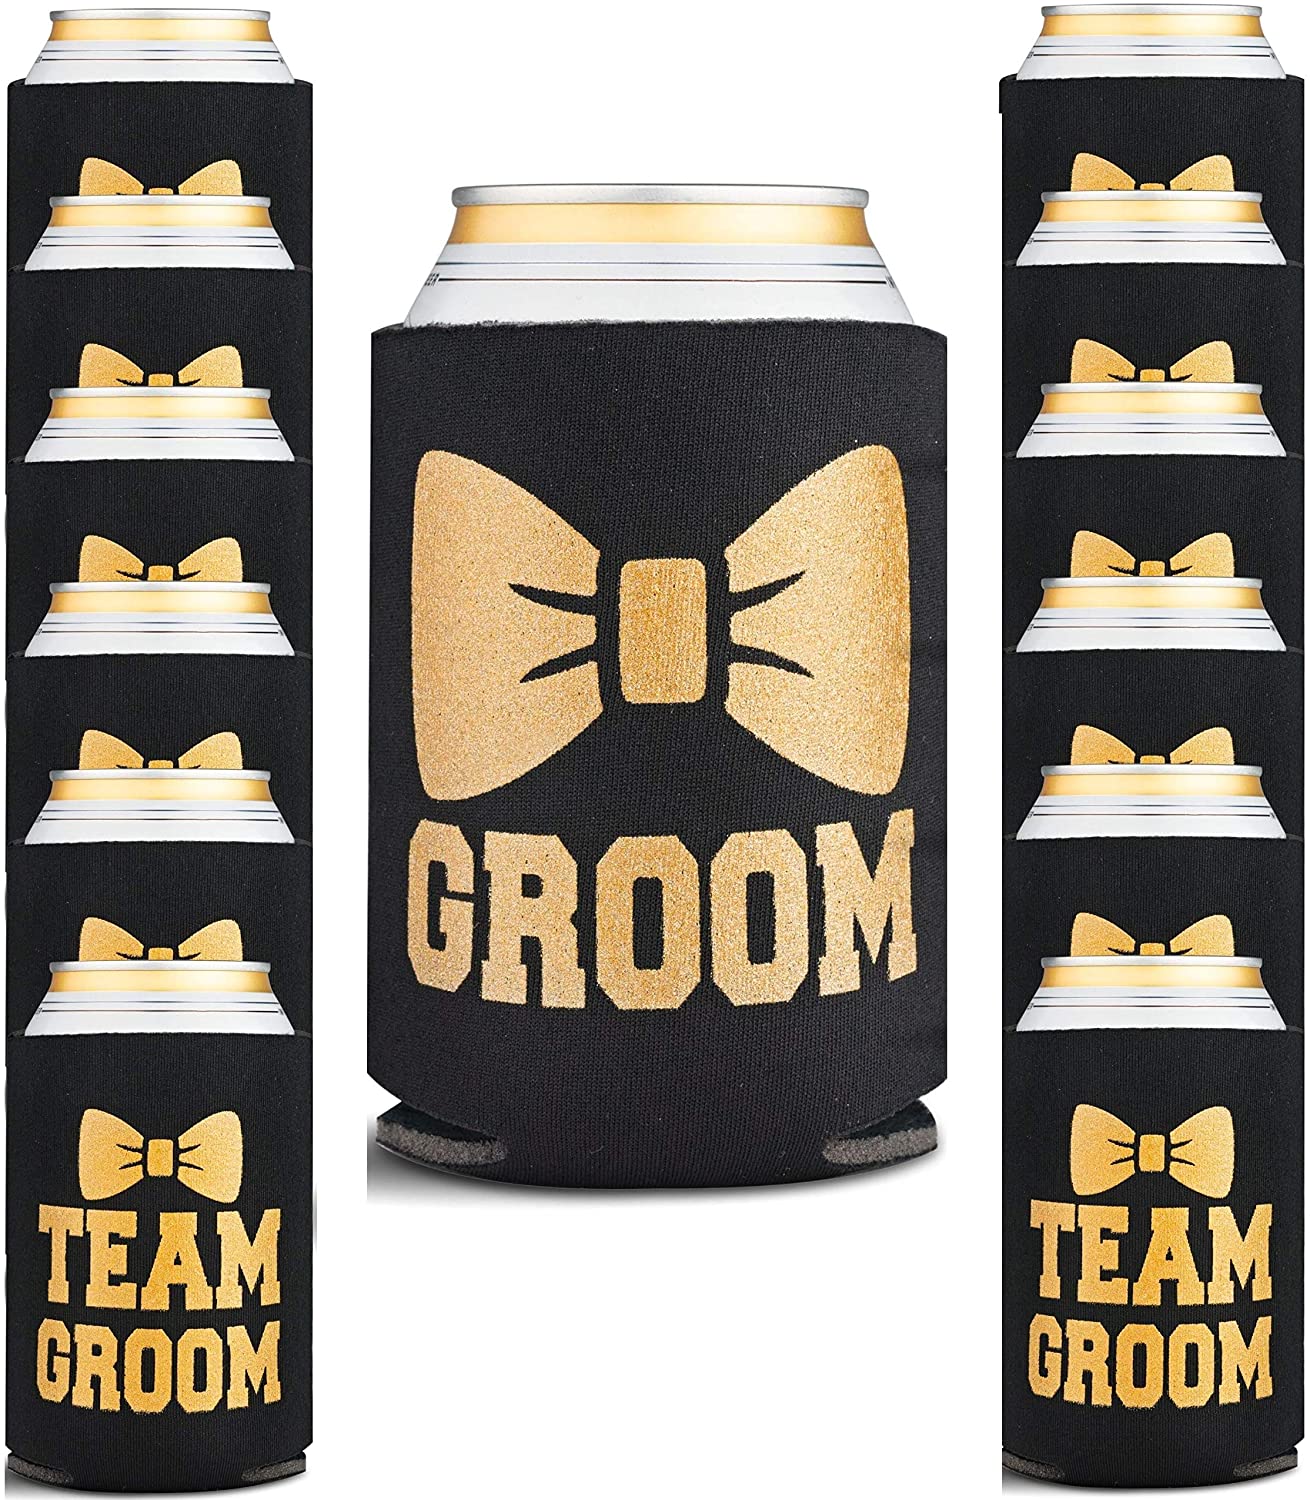 Bachelor Party Decorations for Men - Groomsmen & Groom Beverage Can Cooler  Sleeves & Party Game - Bachelor Party Favors for Wedding, Insulated  Holders, 13 Pack, Black and Gold 